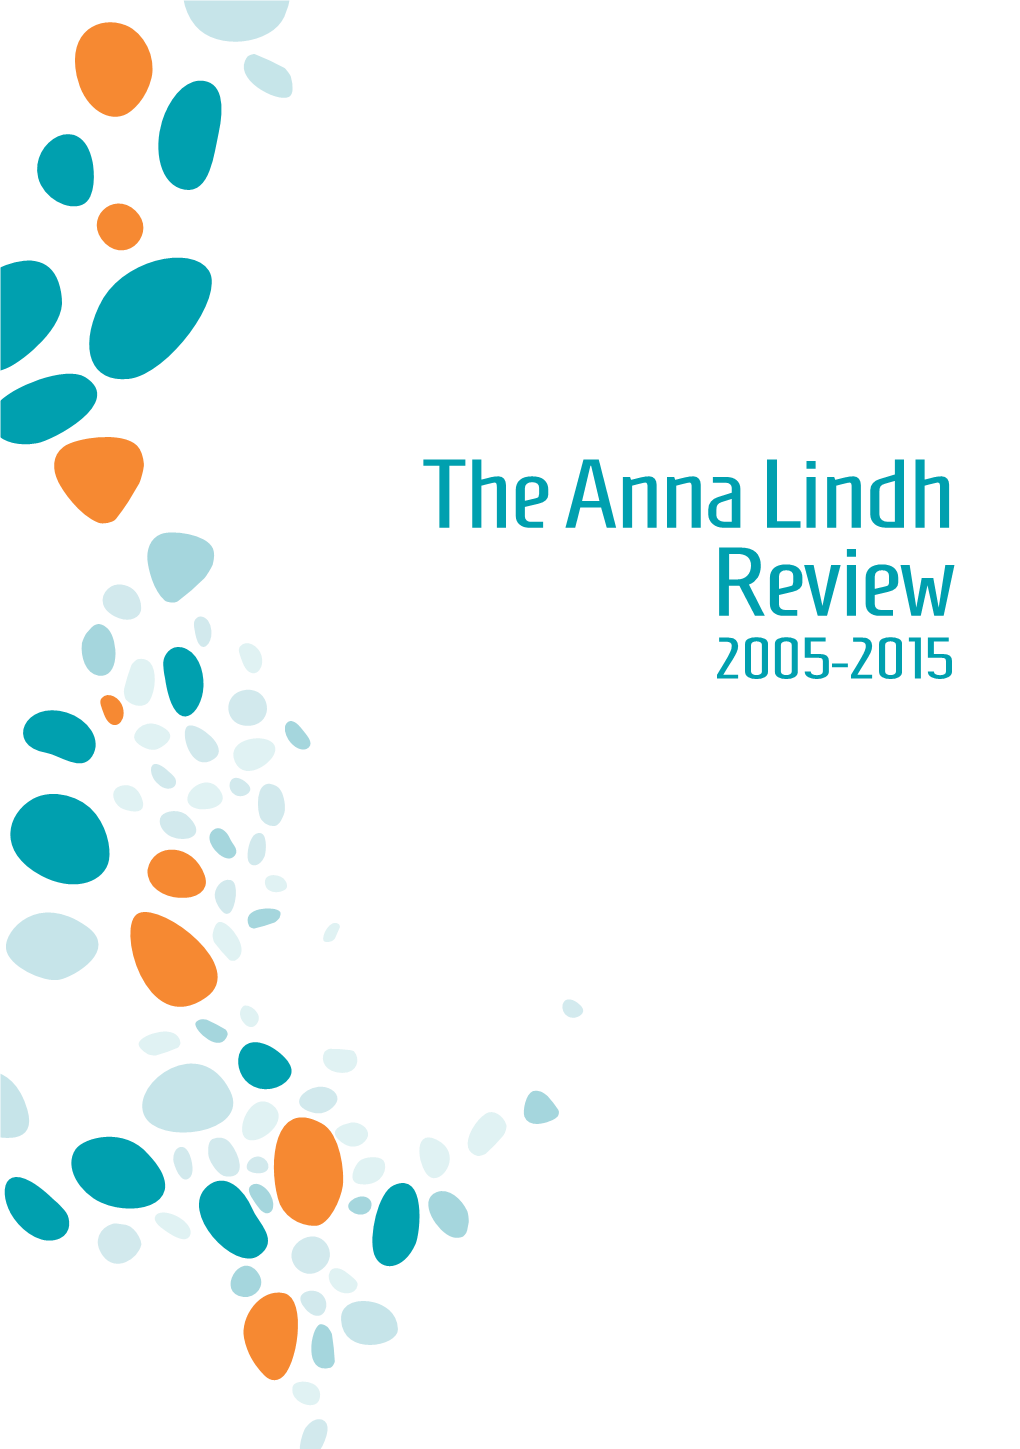 The Anna Lindh Review 2005-2015